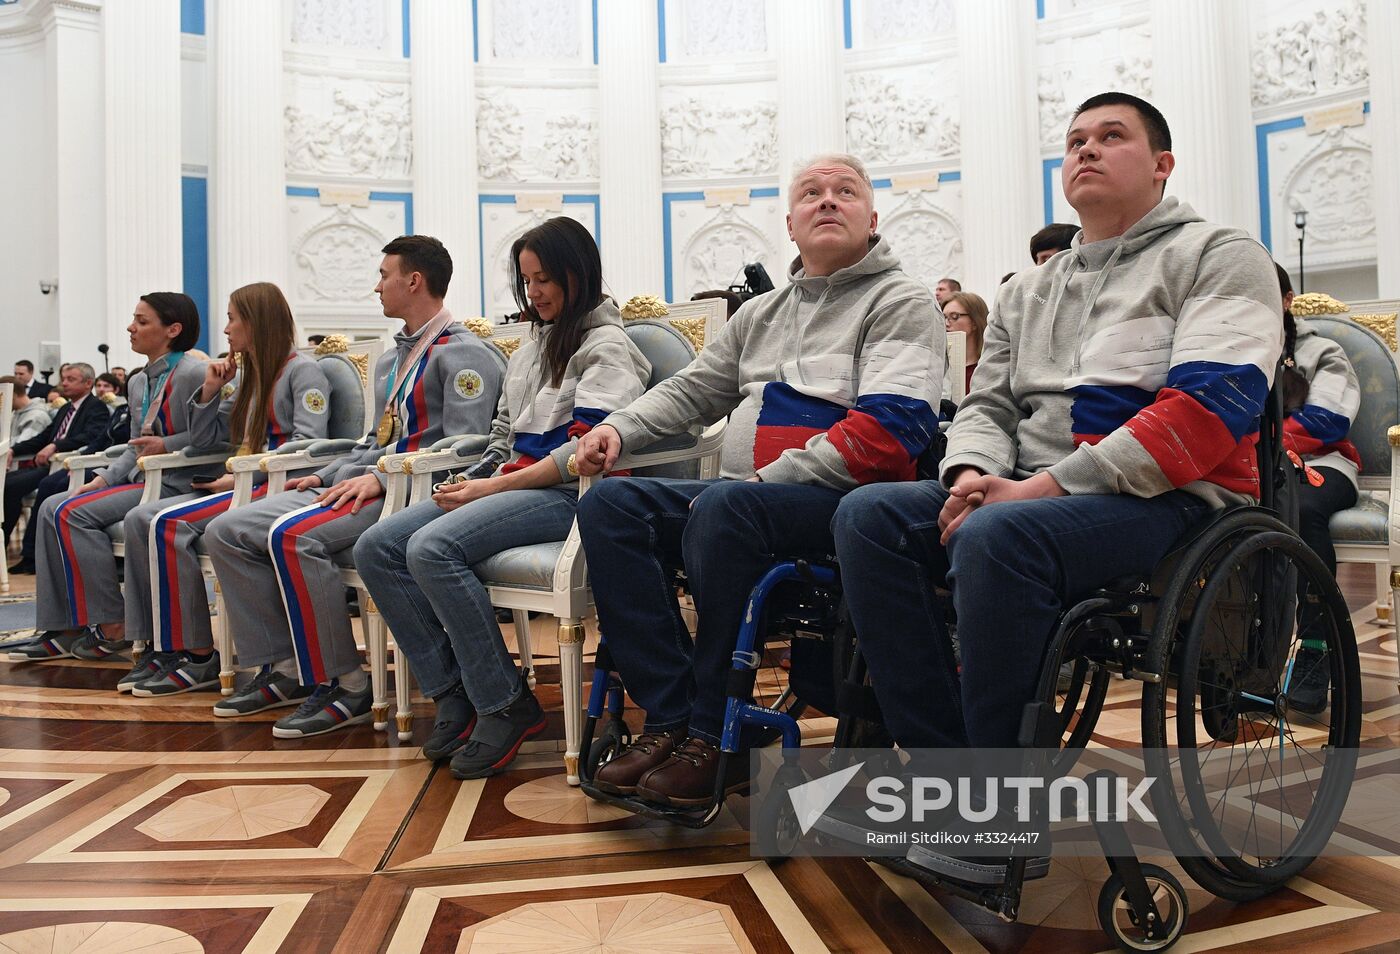 Russian President Vladimir Putin meets with Russian athletes - winners and medalists of 12th Paralympic Winter Games